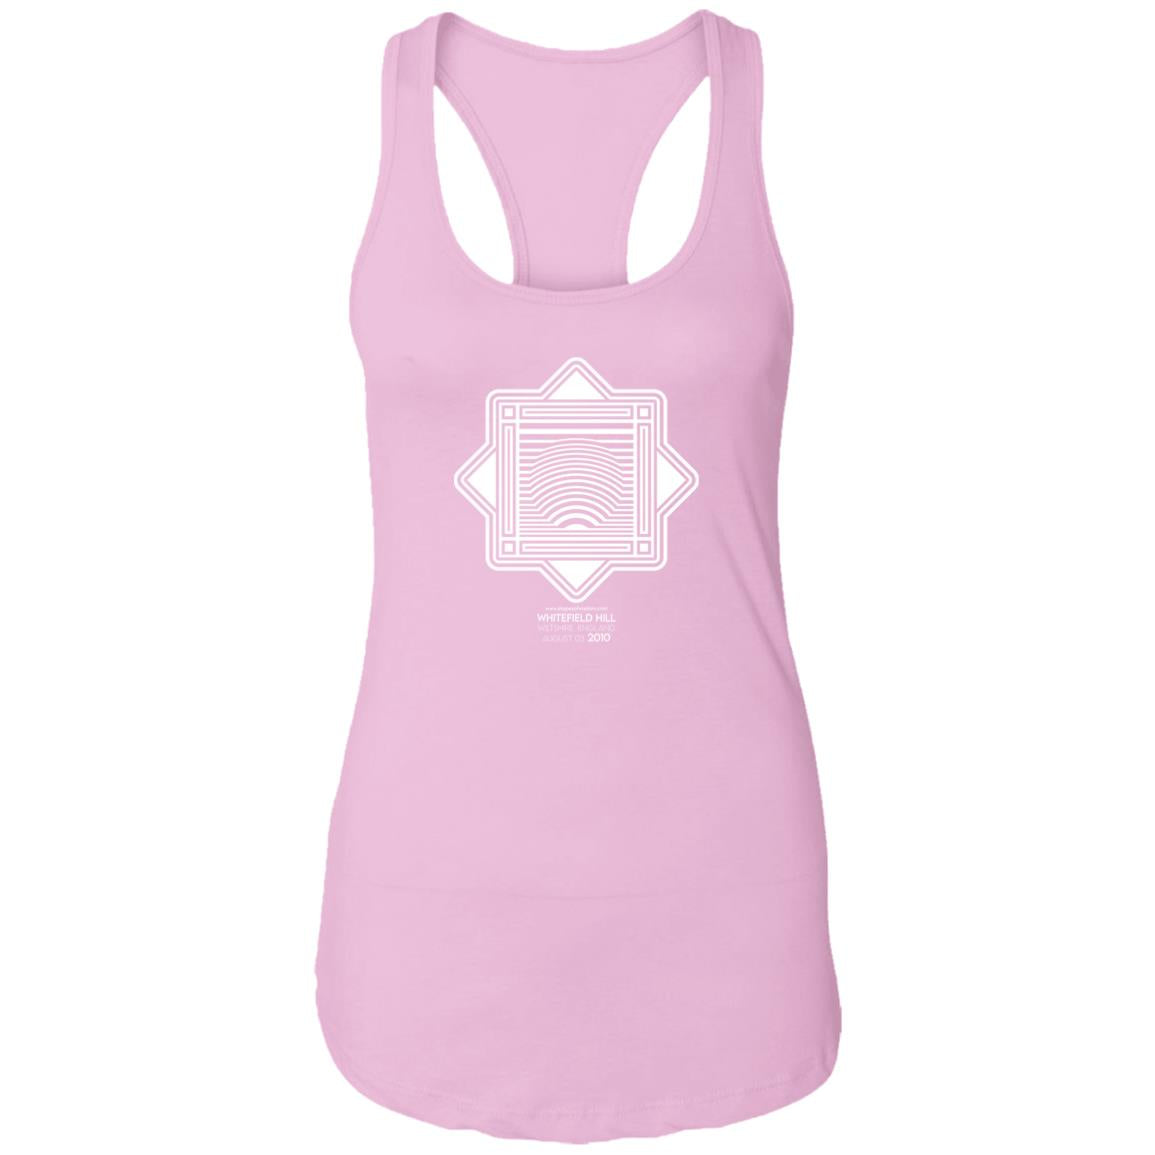 Crop Circle Racerback Tank - Whitefield Hill